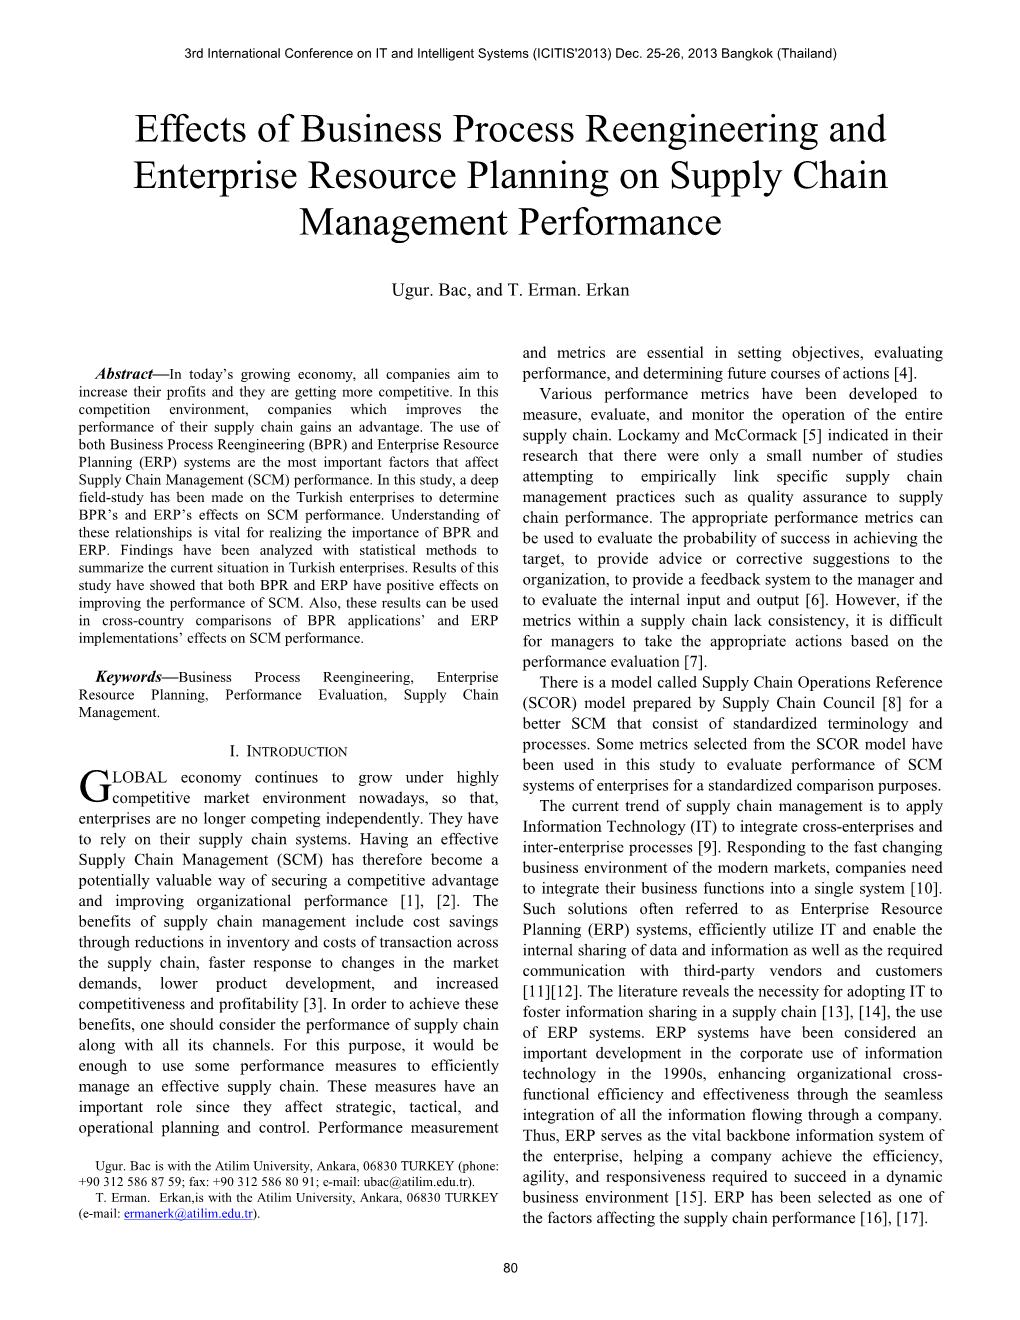 Effects of Business Process Reengineering and Enterprise Resource Planning on Supply Chain Management Performance